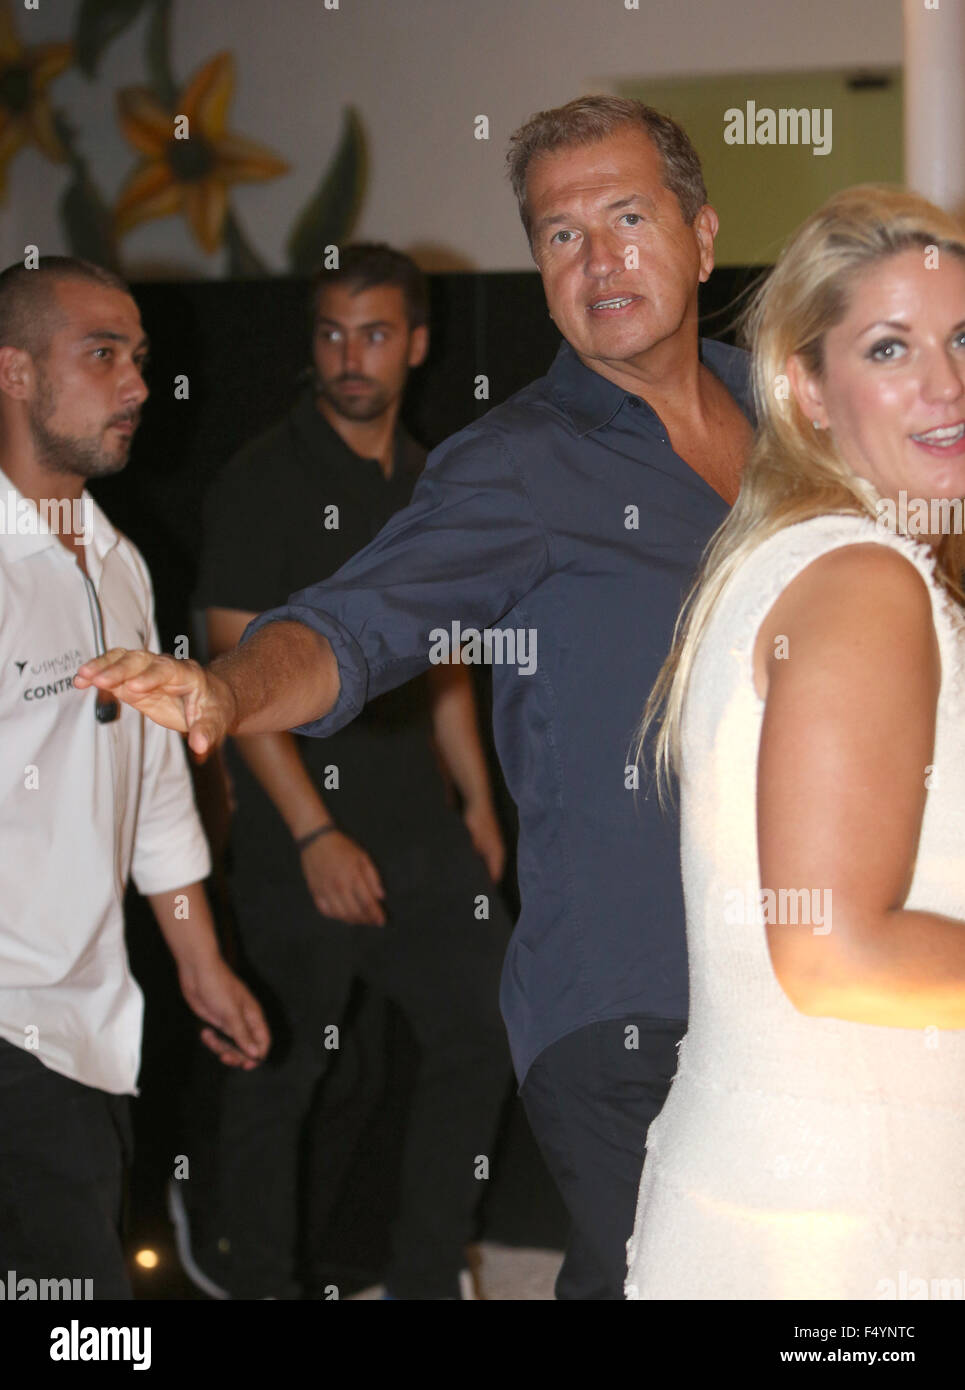 Celebrities attend an event for Casamigos Tequila held at The Ushuaia Tower  Featuring: Mario Testino Where: Ibiza, Spain When: 23 Aug 2015 C Stock Photo